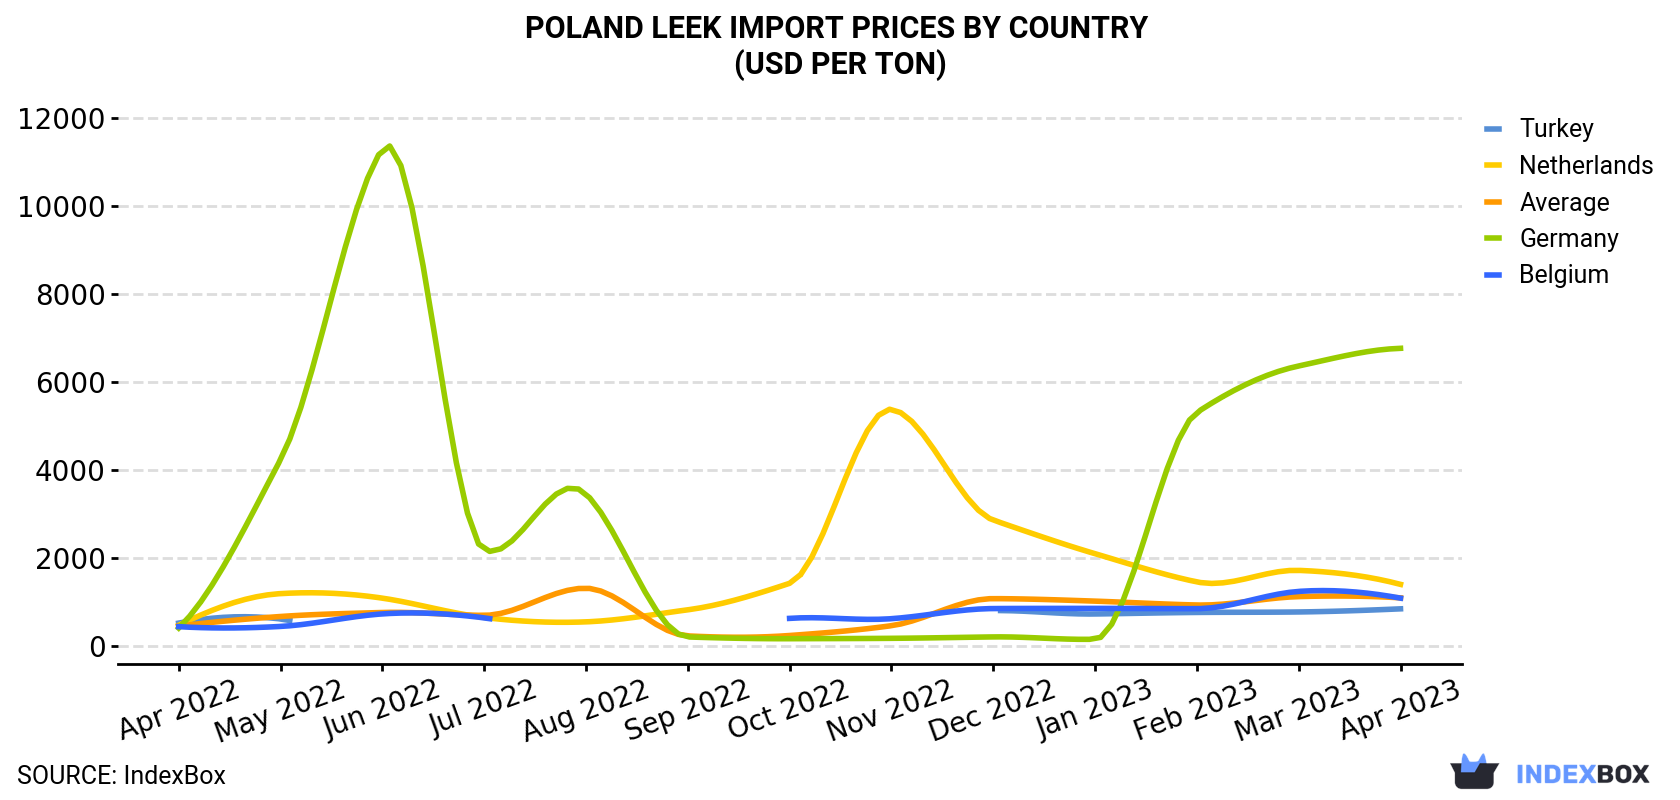 Poland Leek Import Prices By Country (USD Per Ton)